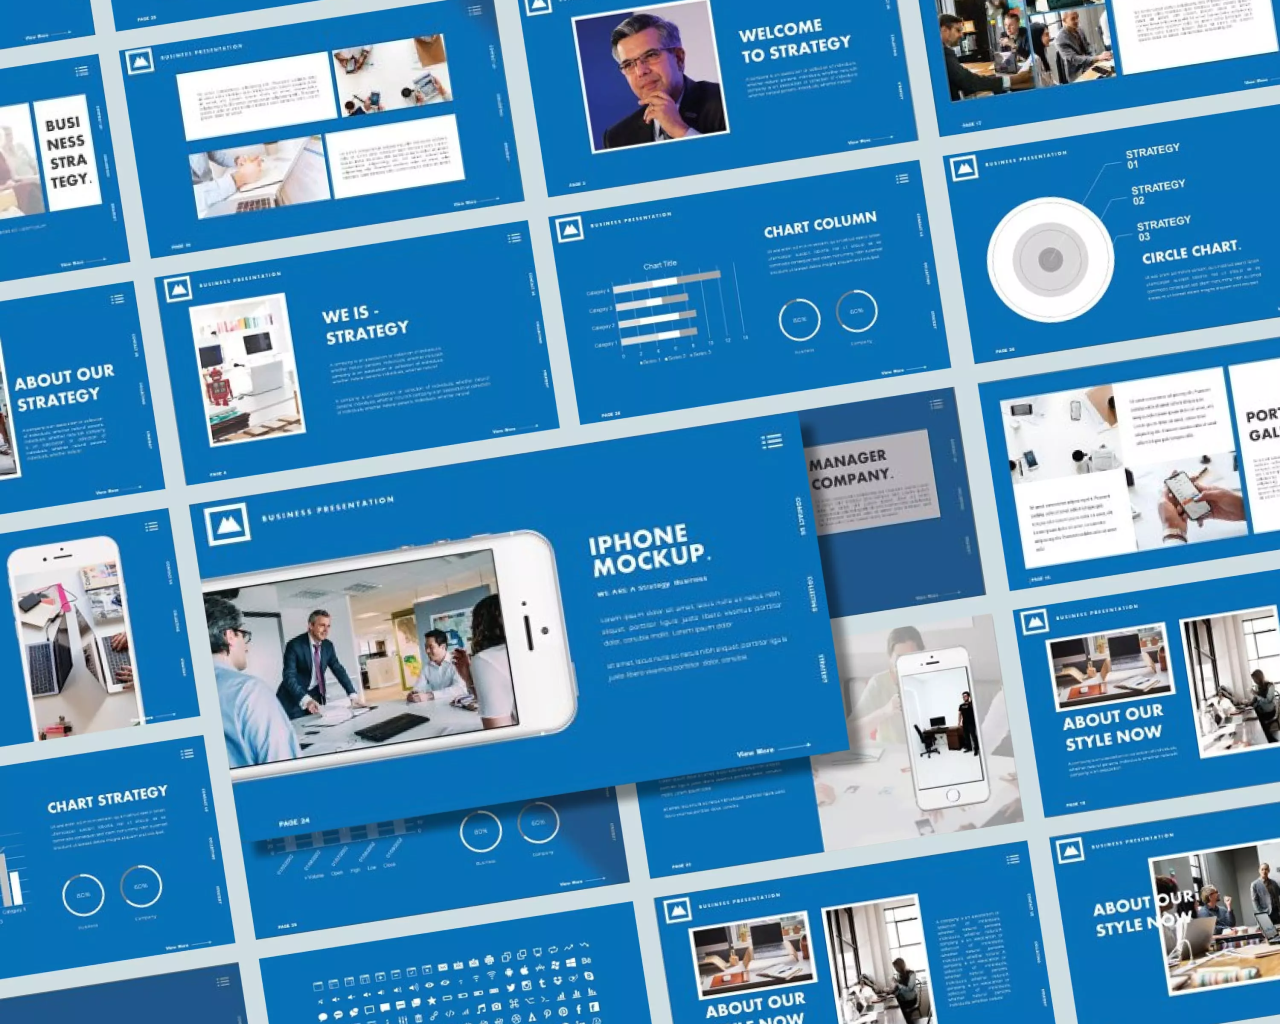 7 Best Powerpoint Templates To Use For Professional Business Presentations 7